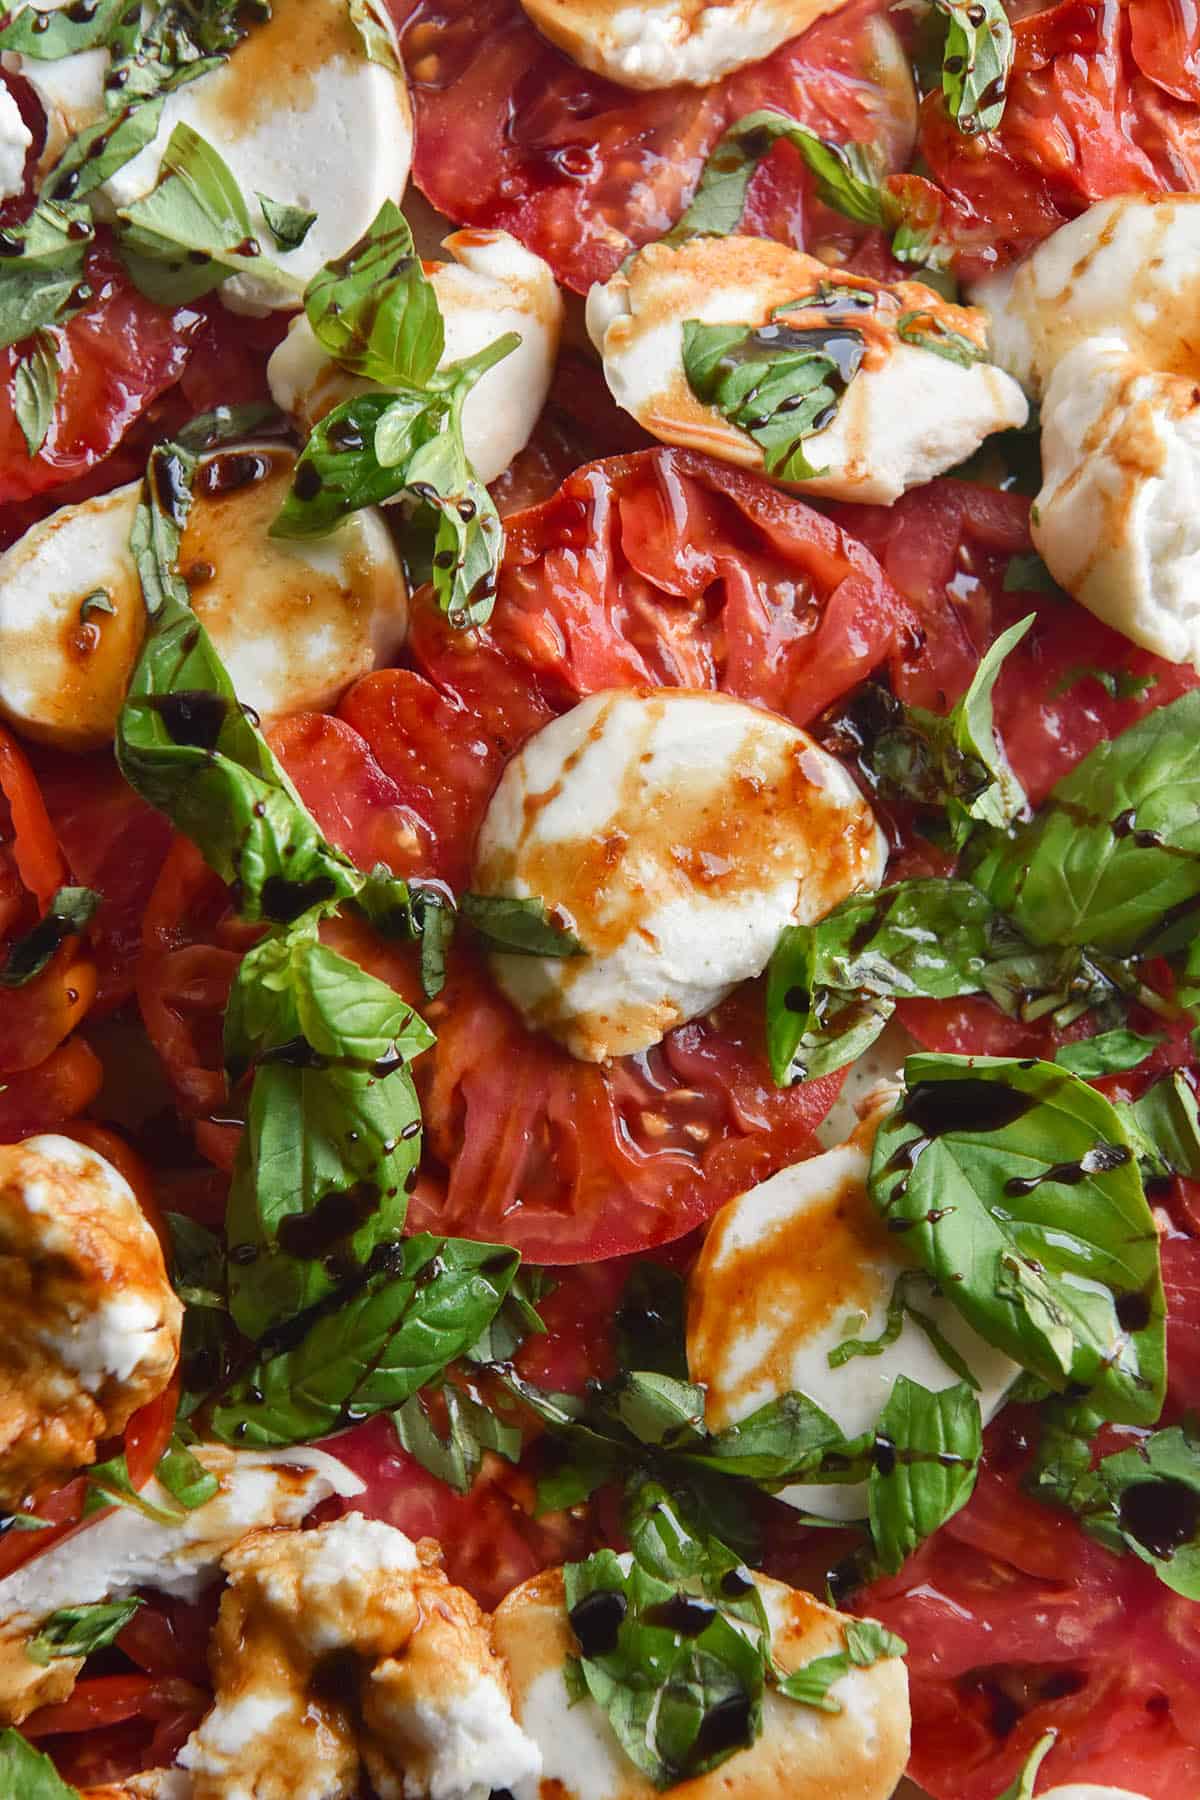 An aerial close up image of vegan macadamia mozzarella in a caprese salad. The salad is drizzled with a balsamic reduction which colours parts of the mozzarella in a deep orange hue